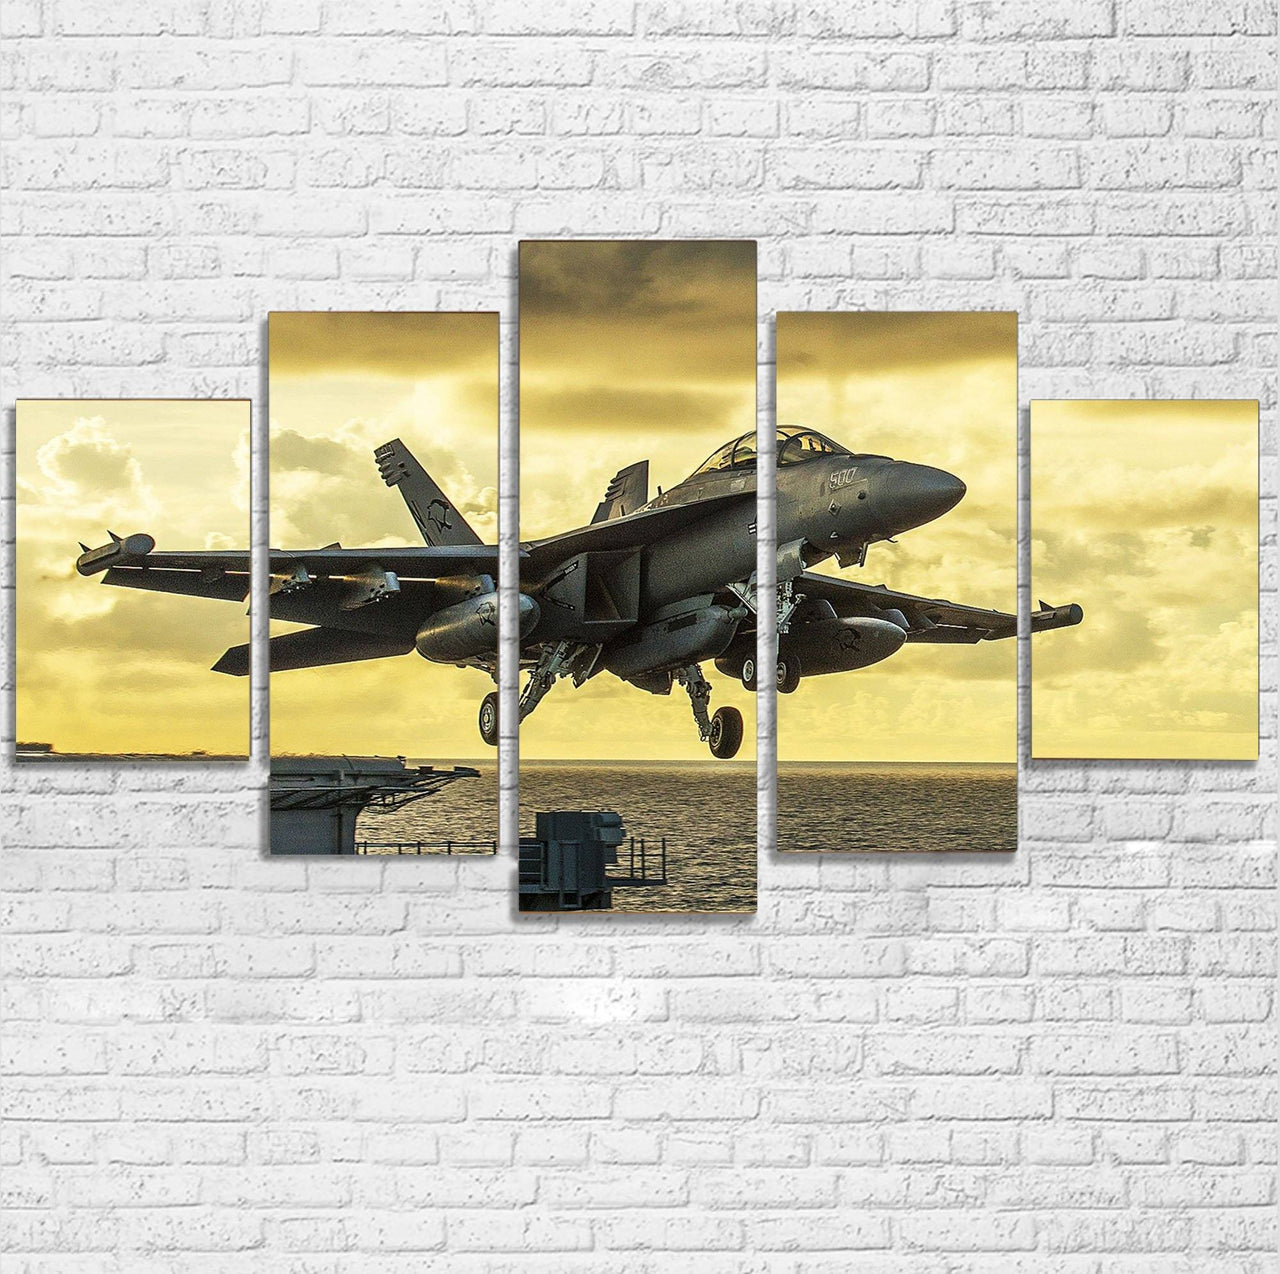 Departing Jet Aircraft Printed Multiple Canvas Poster Aviation Shop 